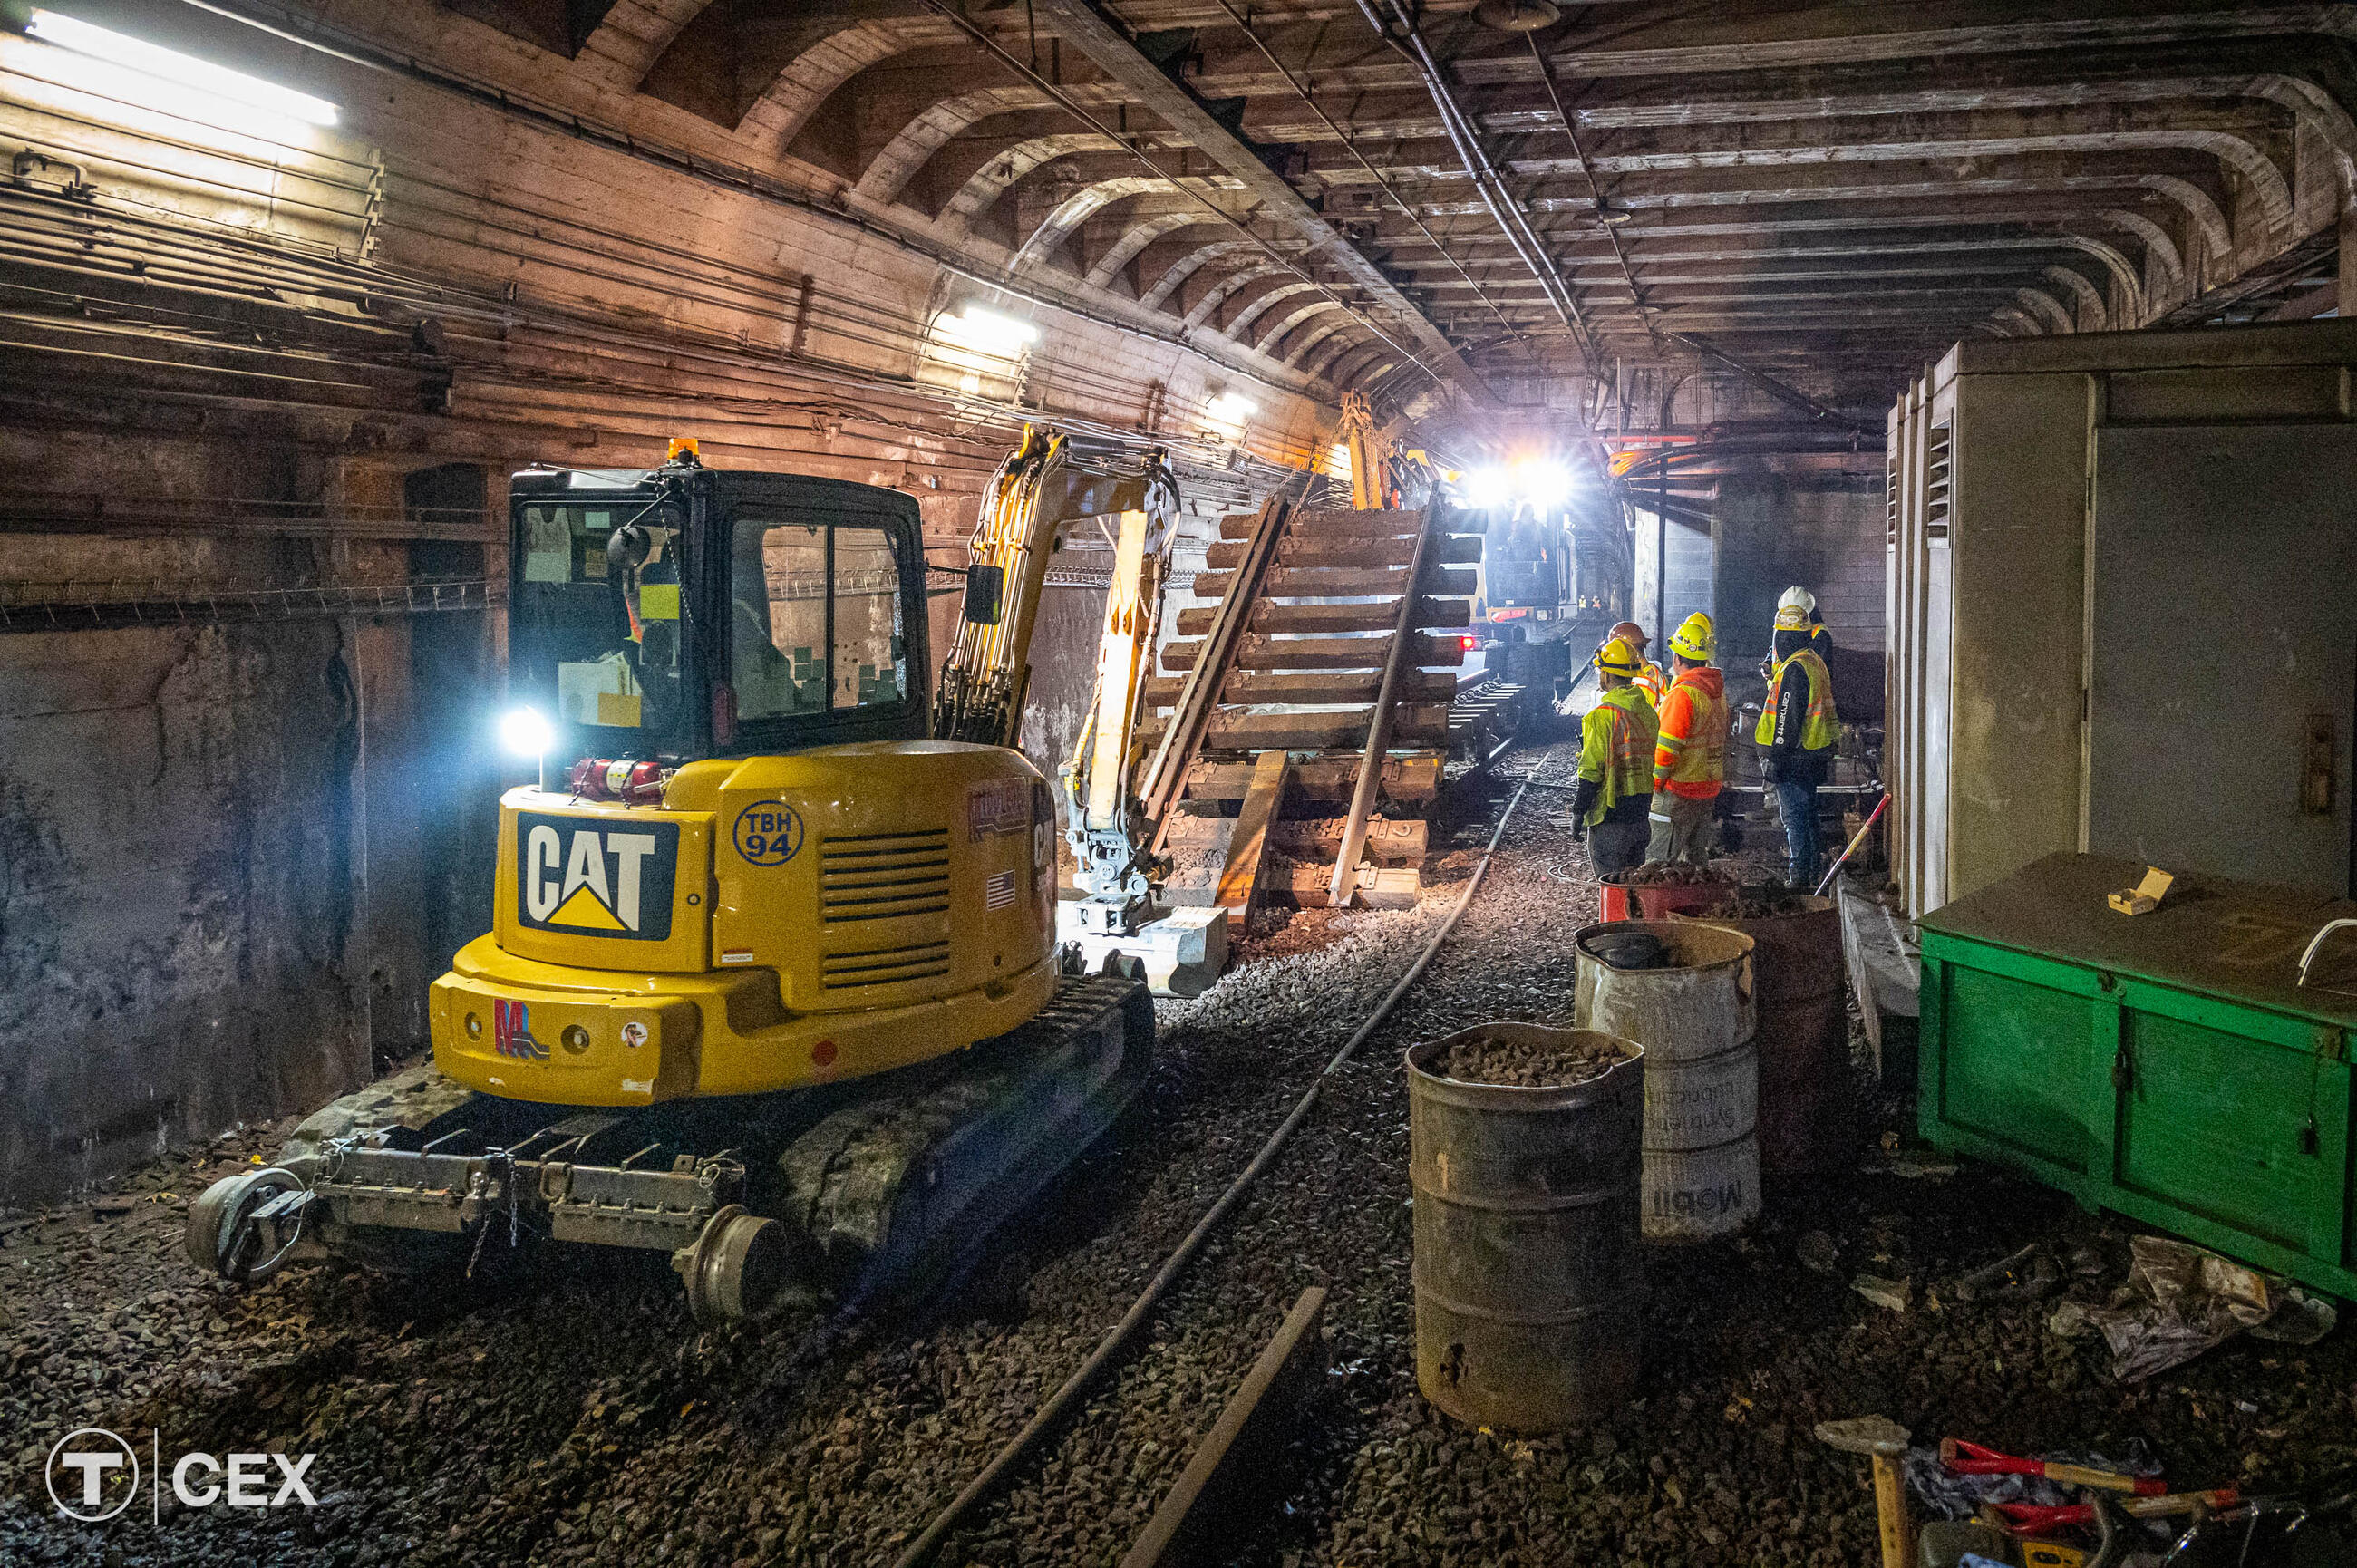 Crews performing track and tie replacement work near Arlington station.